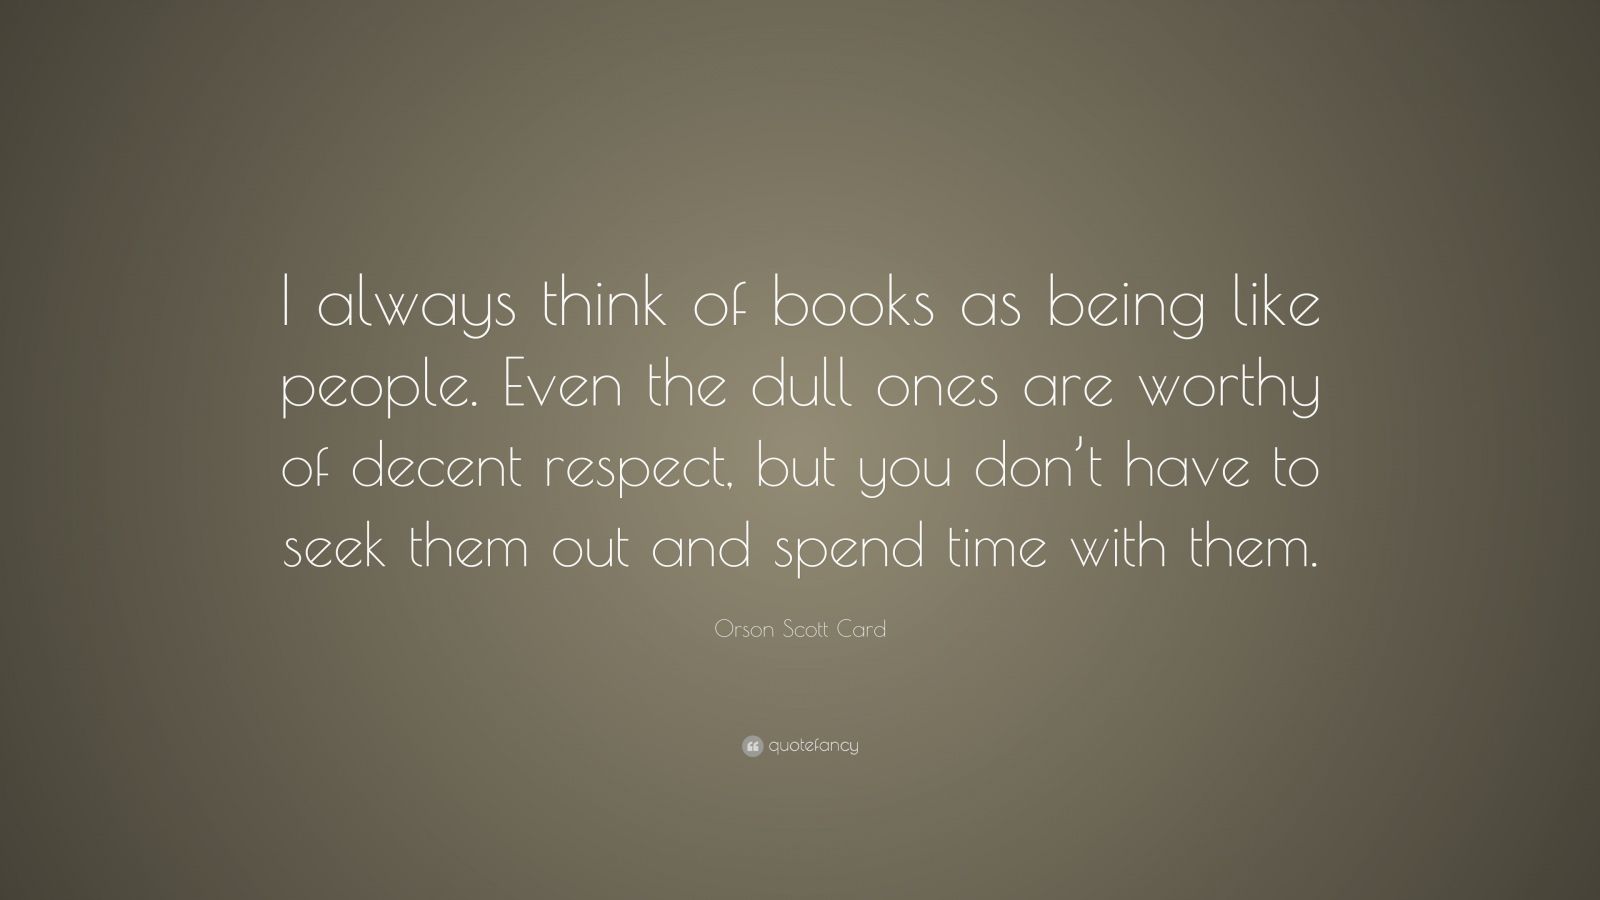 Orson Scott Card Quote: “I always think of books as being like people ...